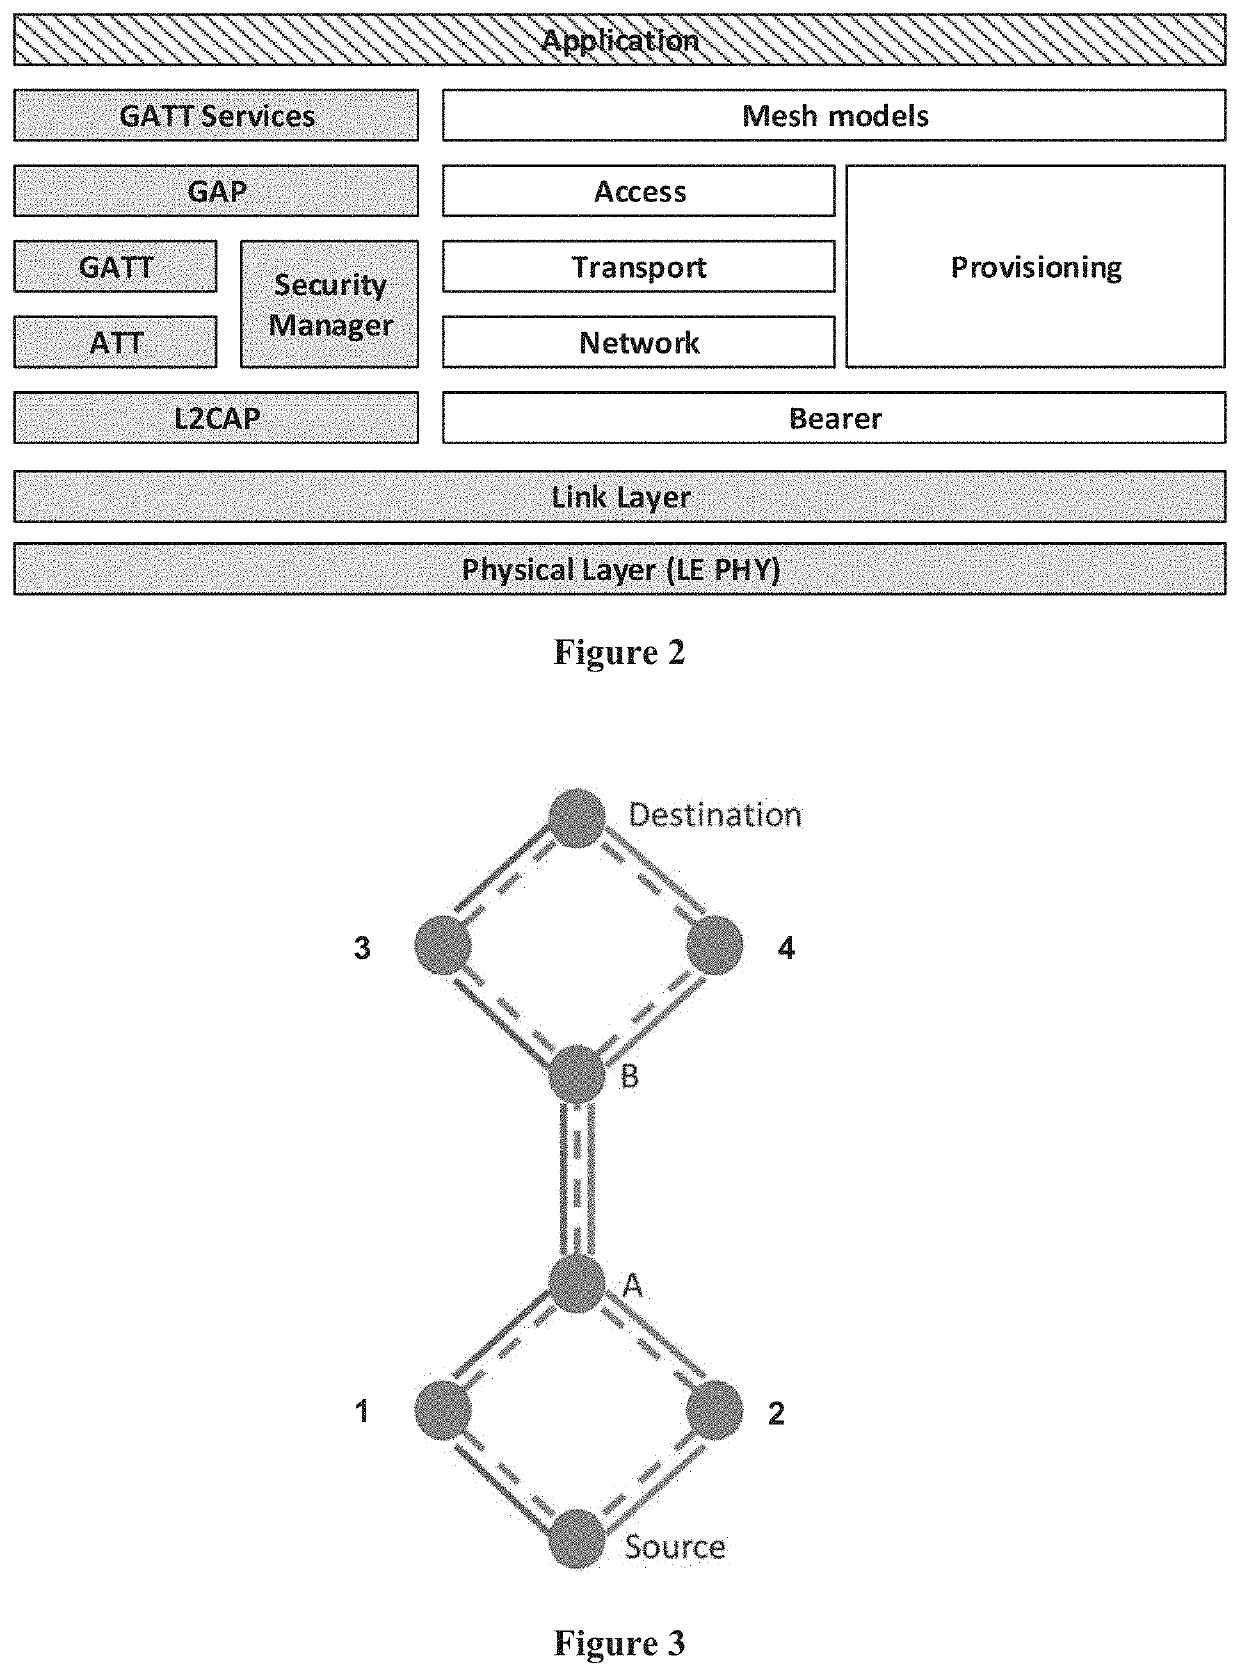 Detecting Critical Links in Bluetooth Mesh Networks